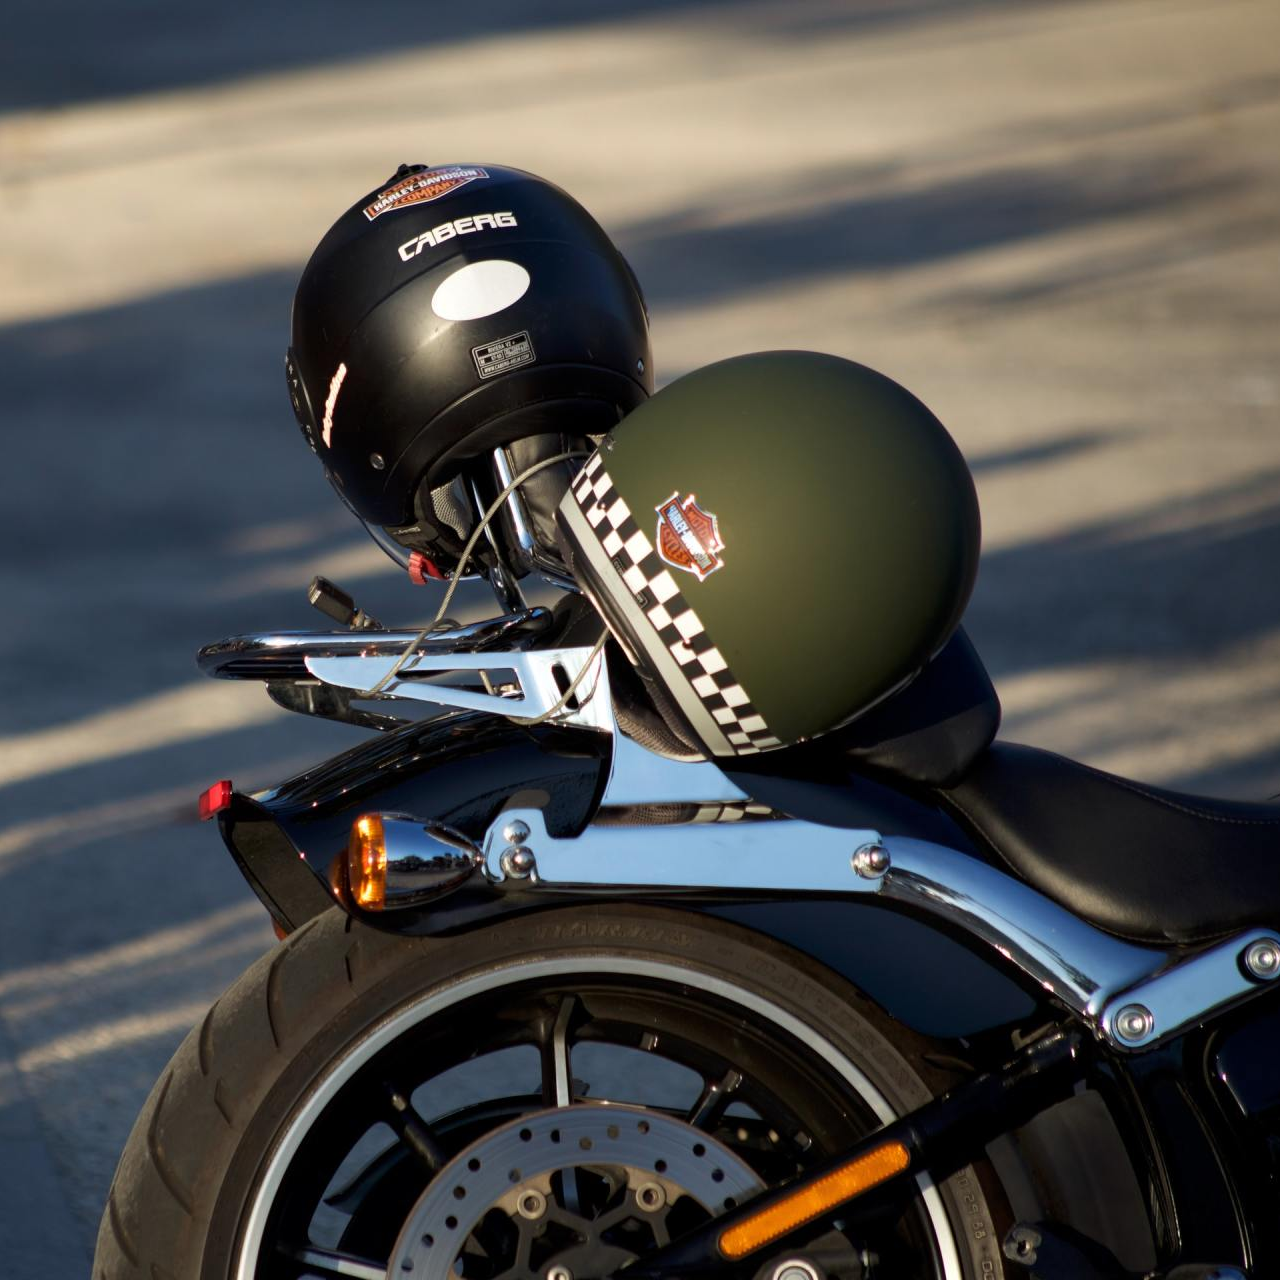 Motorcycle helmets placed on the back of a motorcycle